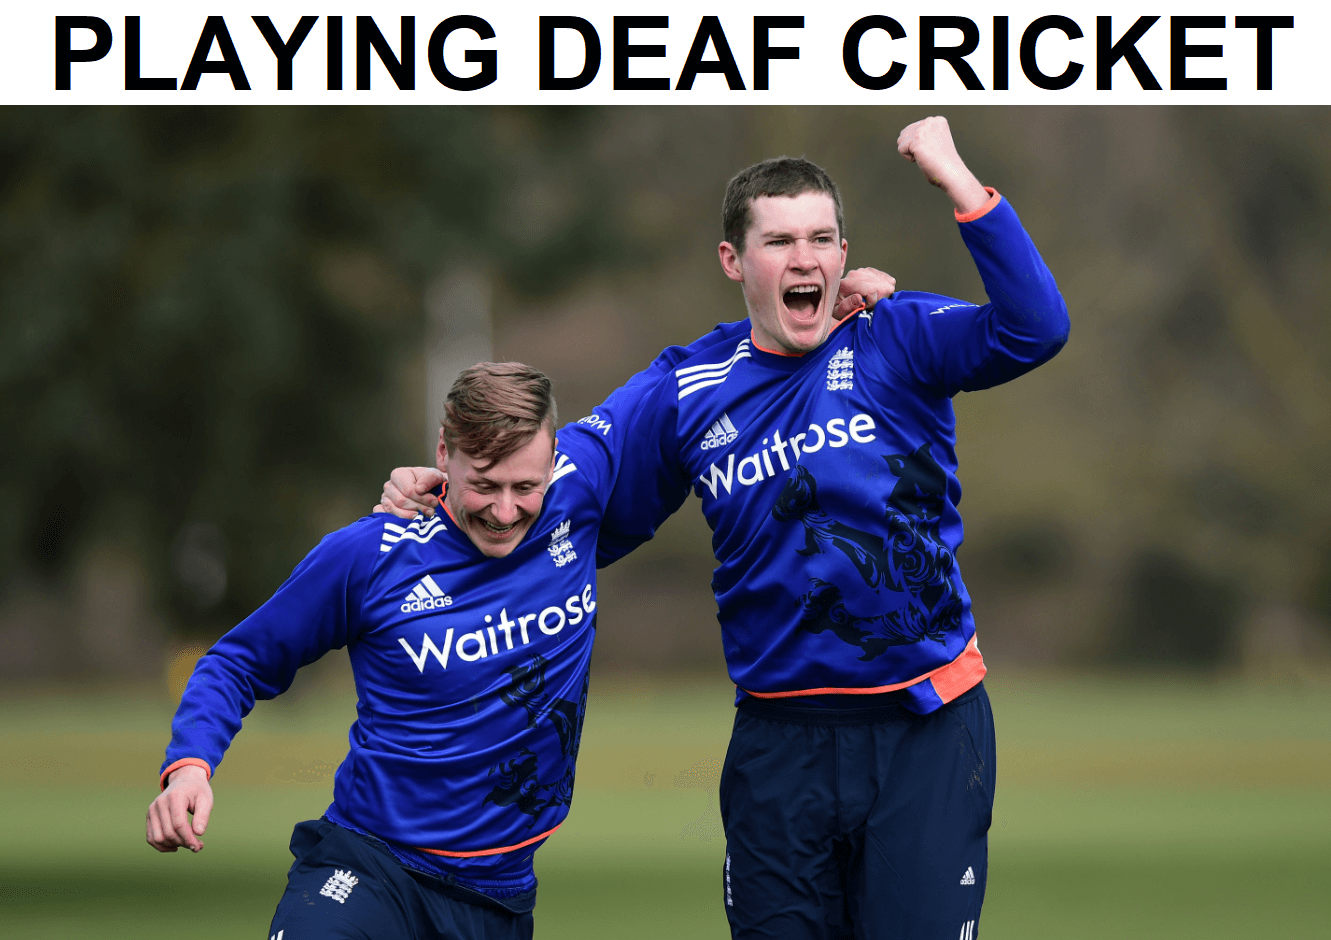 How is deaf cricket played?